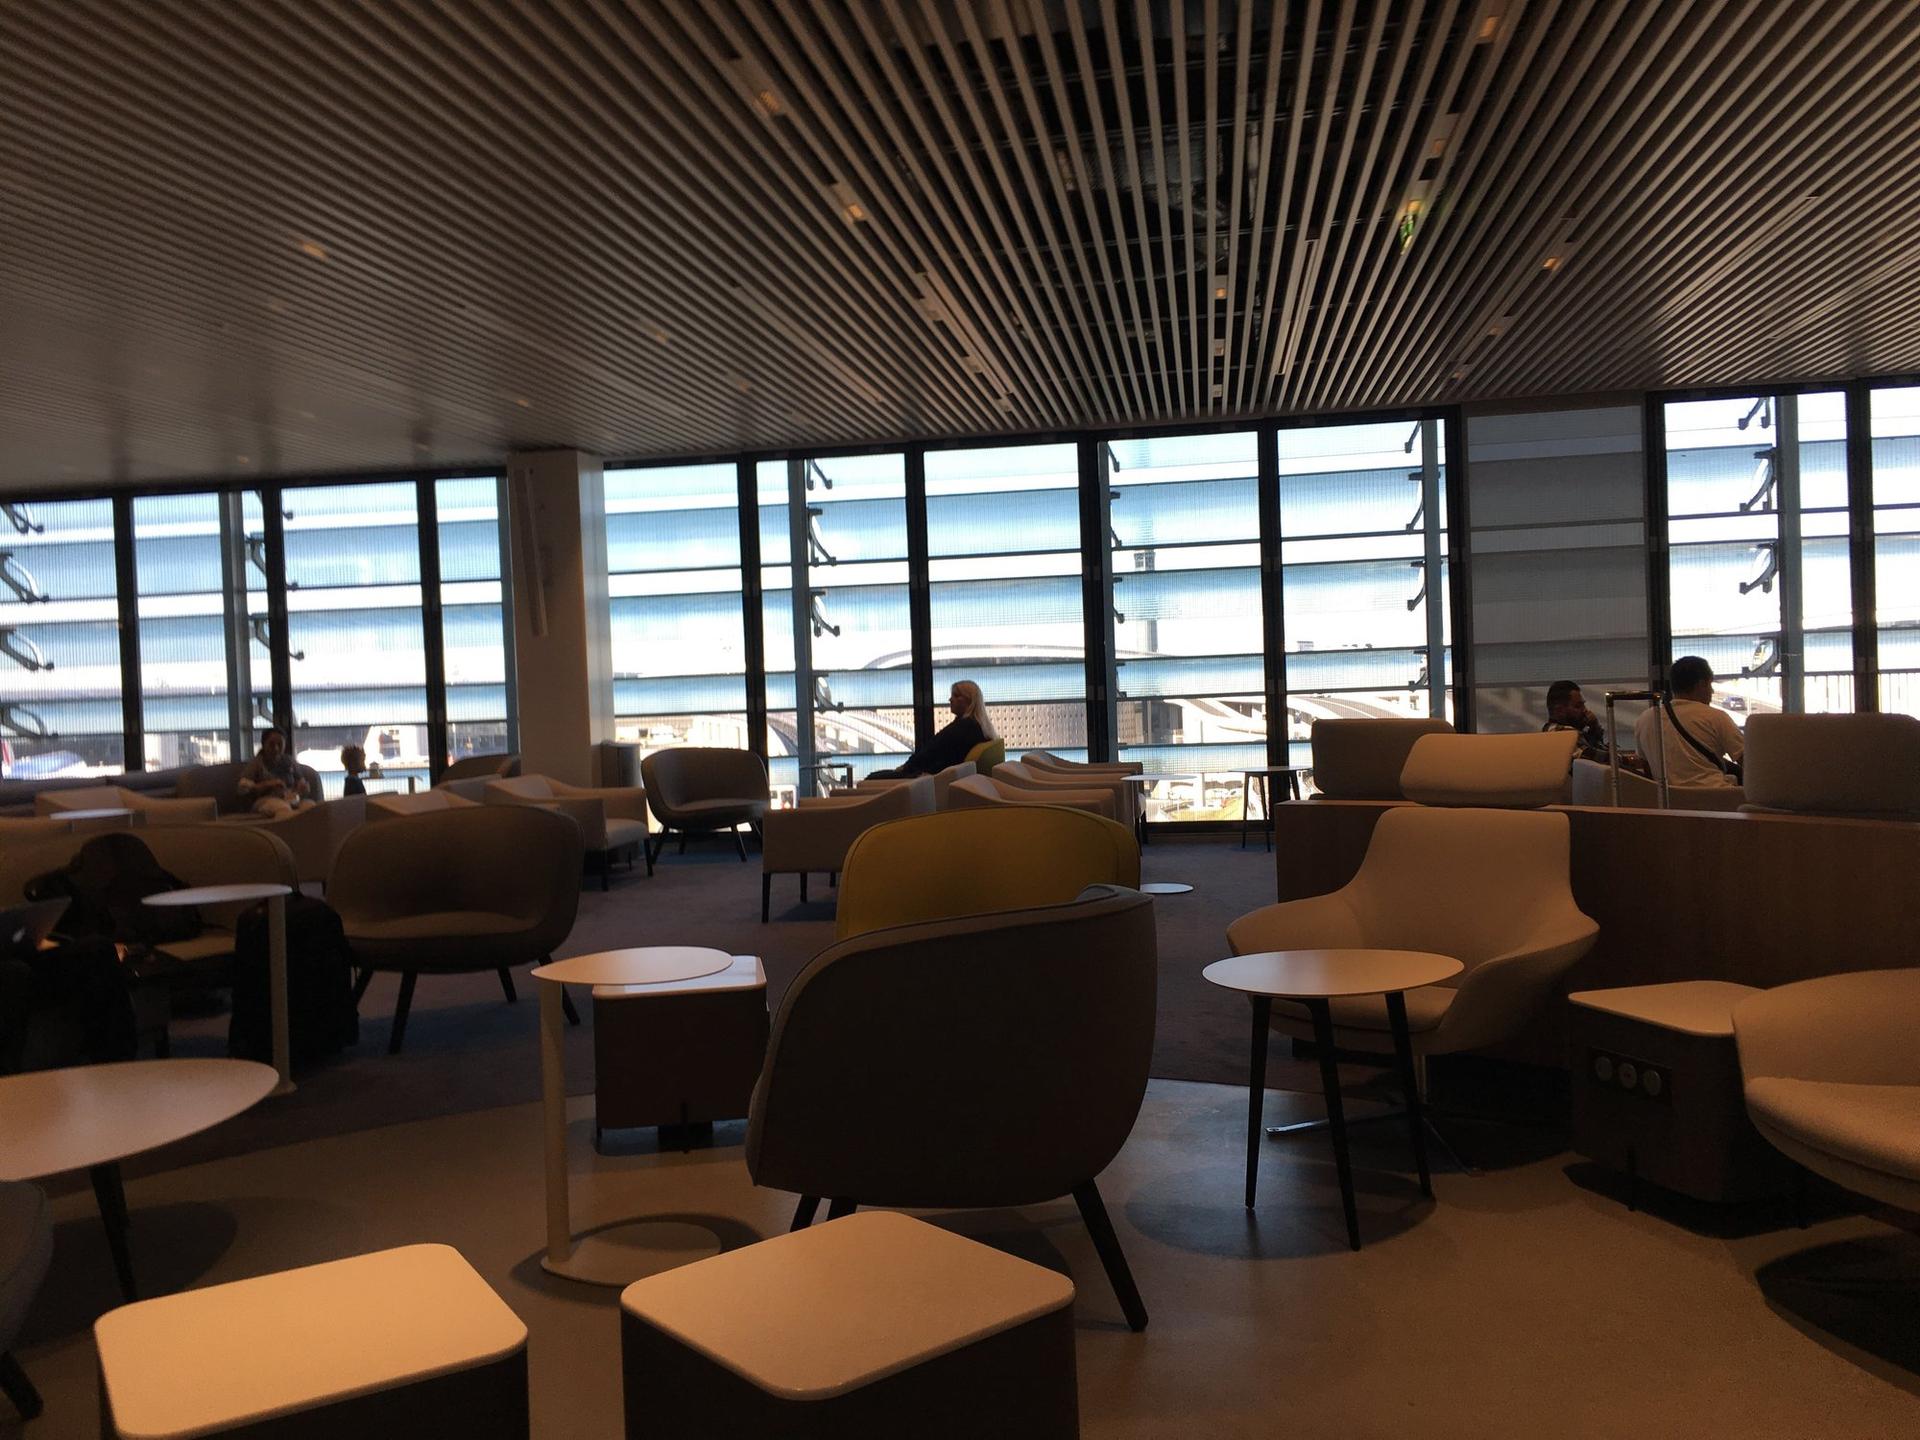 Air France Lounge (Concourse L) image 48 of 57